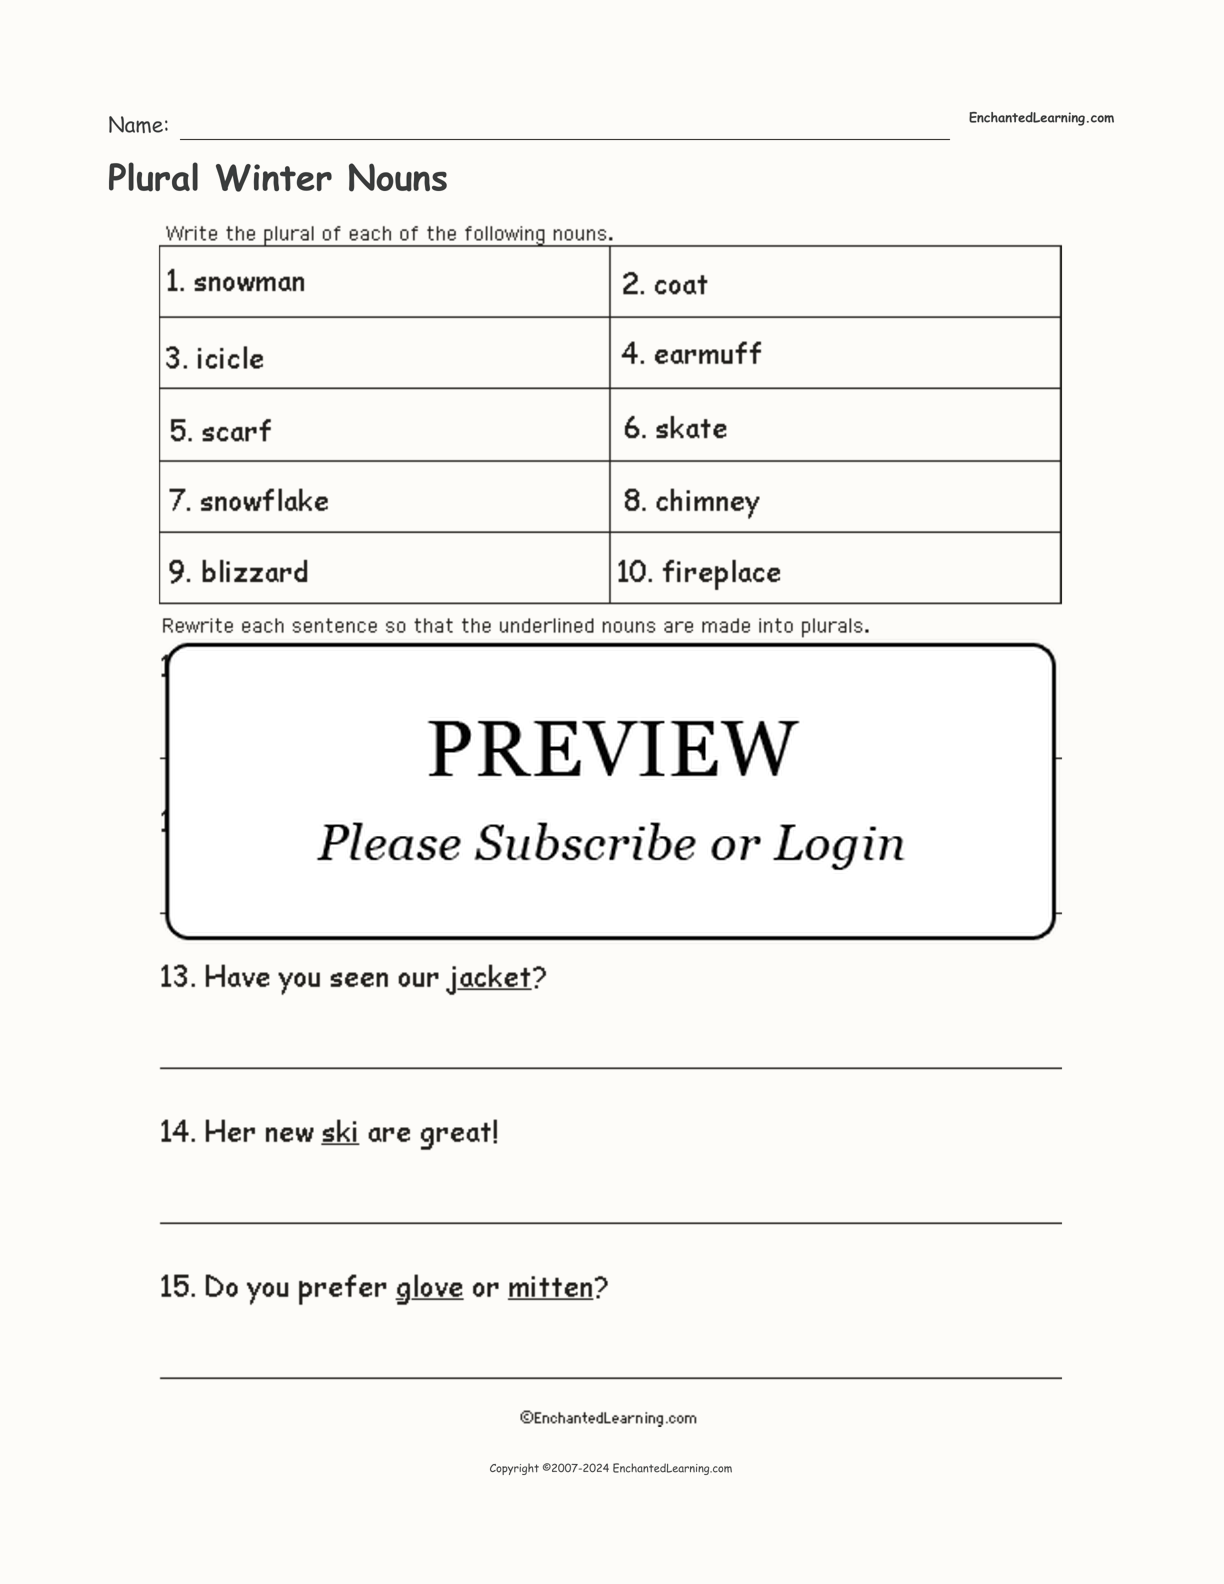 Plural Winter Nouns interactive worksheet page 1